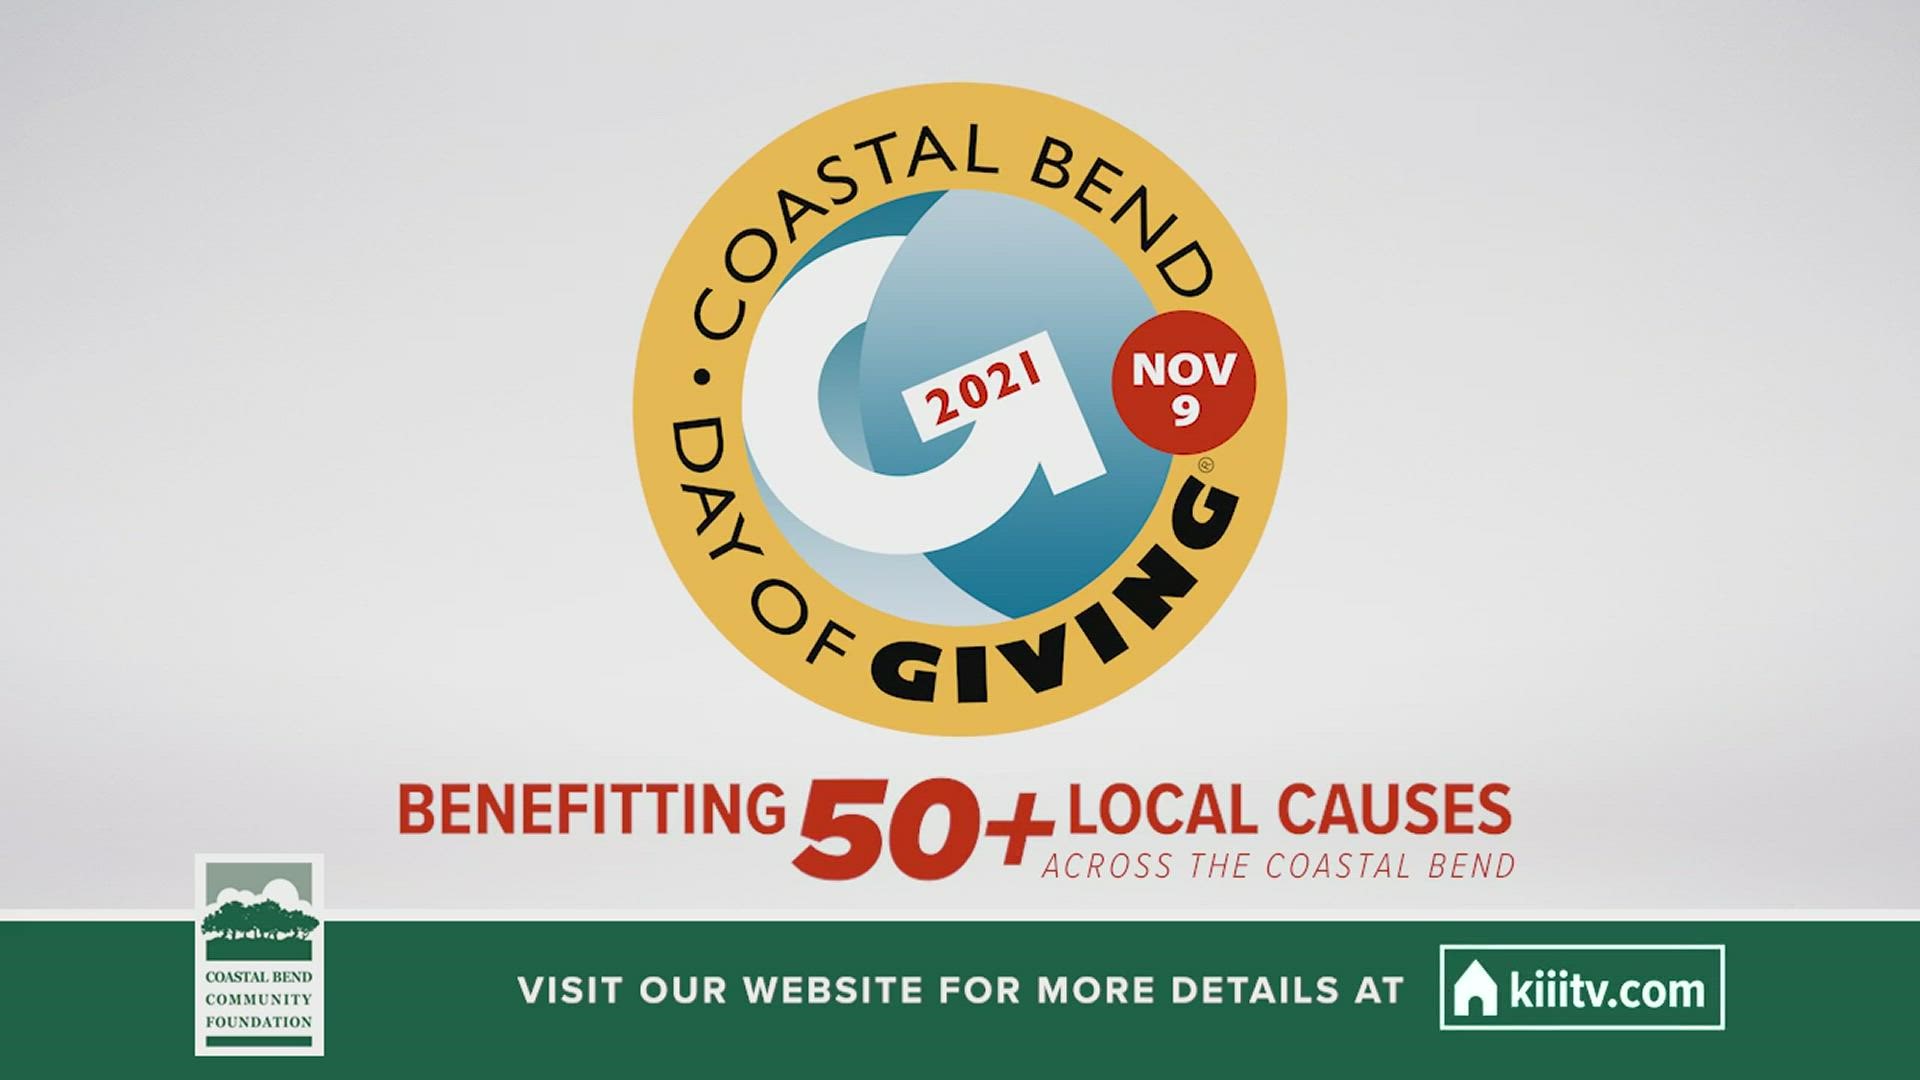 Support area nonprofits on this Coastal Bend Day of Giving!